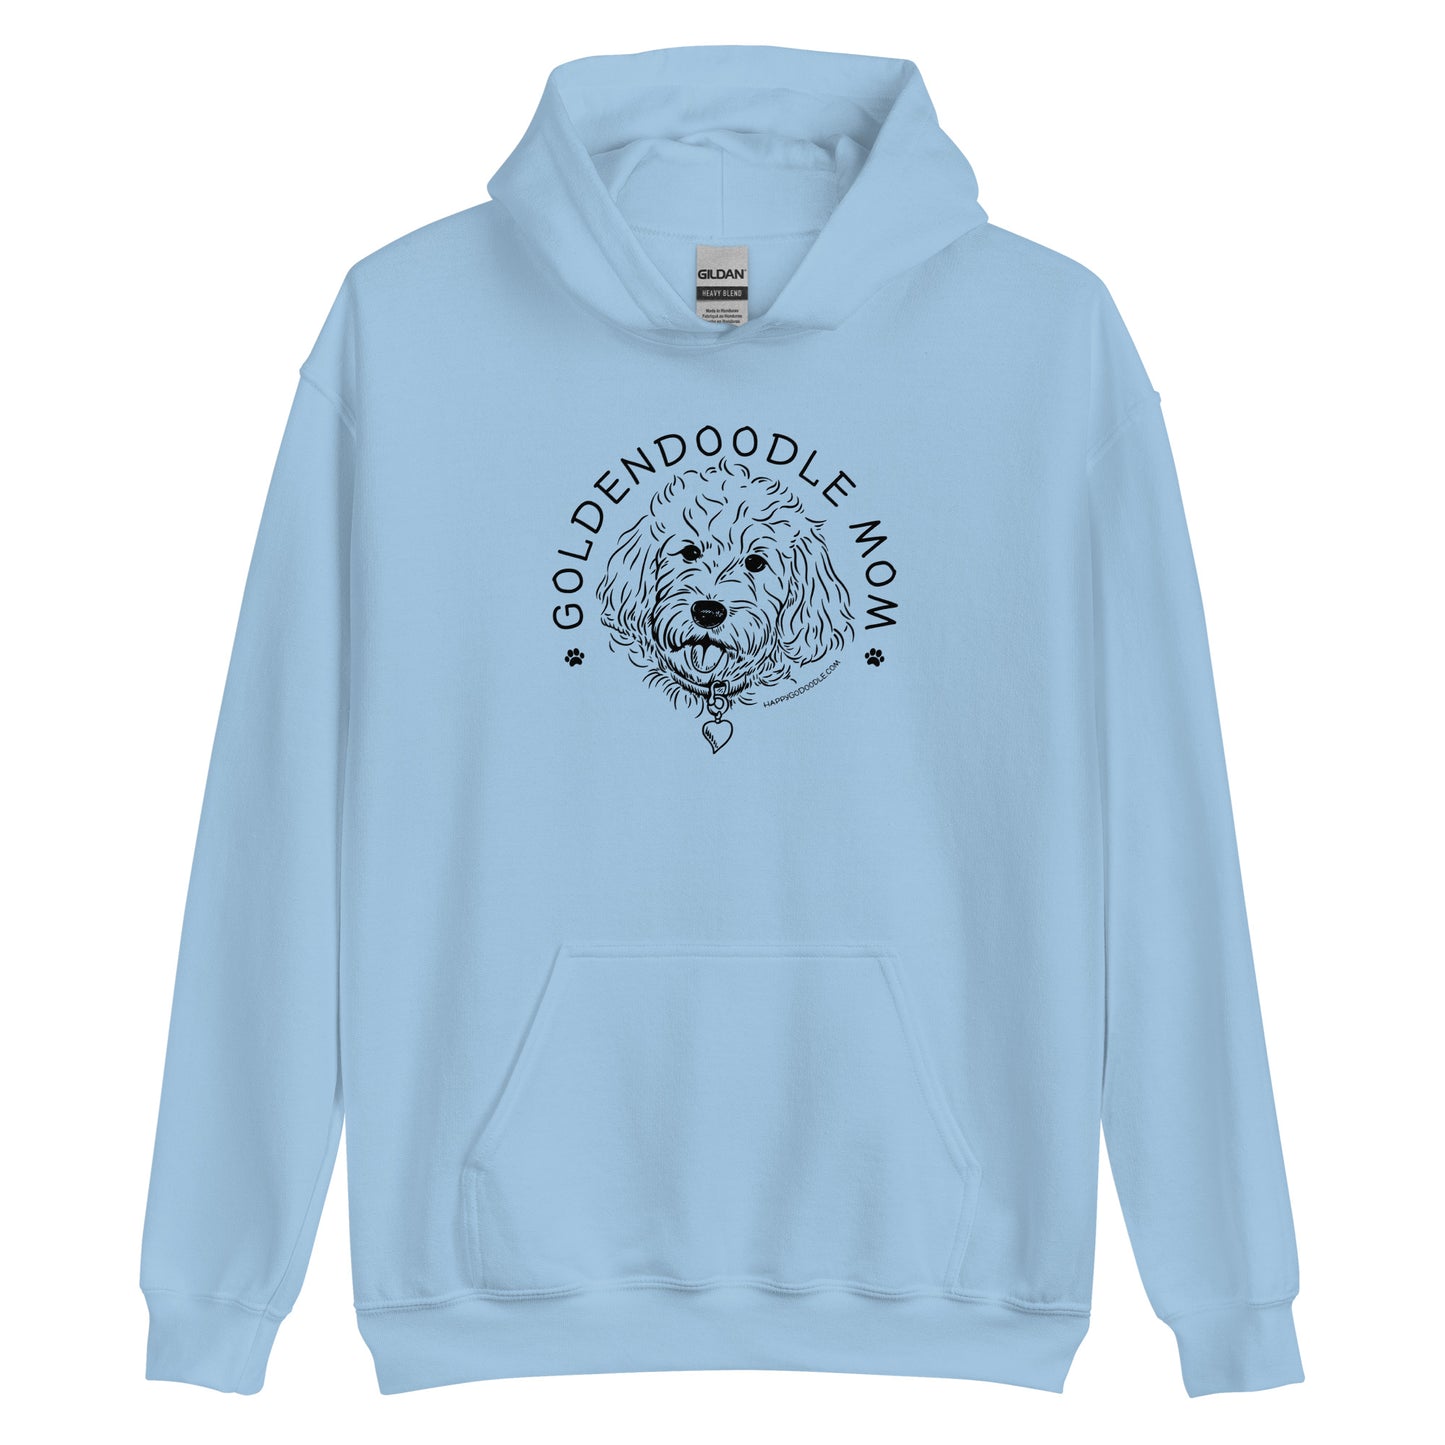 Goldendoodle hoodie with Goldendoodle face and words "Goldendoodle Mom" in light blue  color